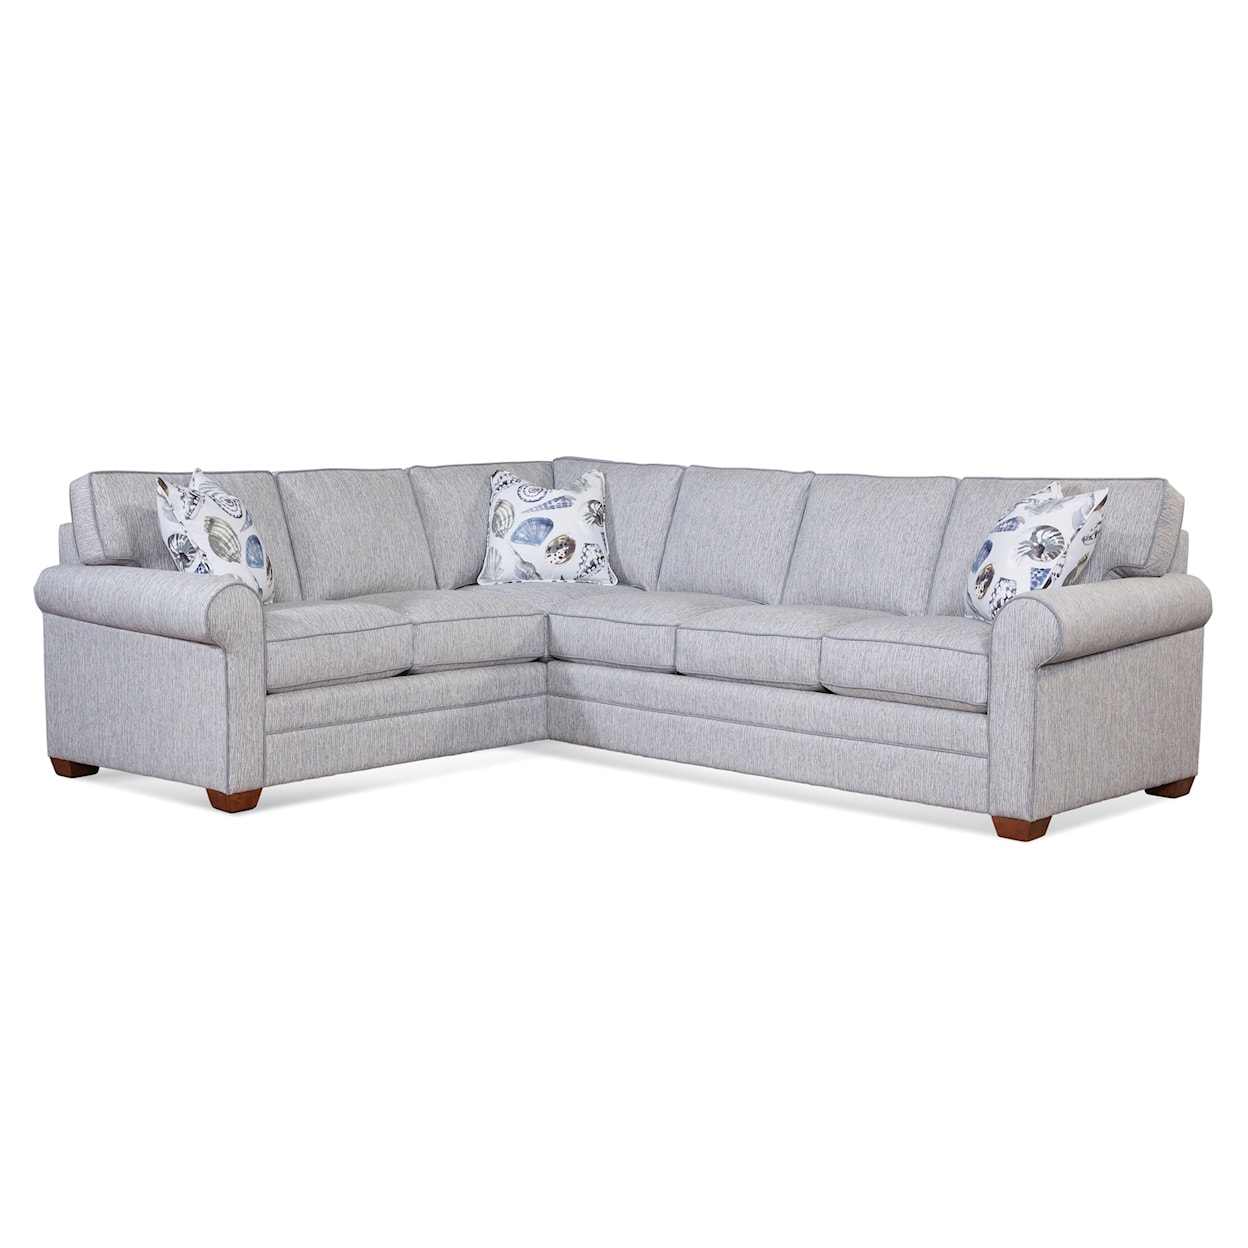 Braxton Culler Bedford Two-Piece Corner Sectional Sofa